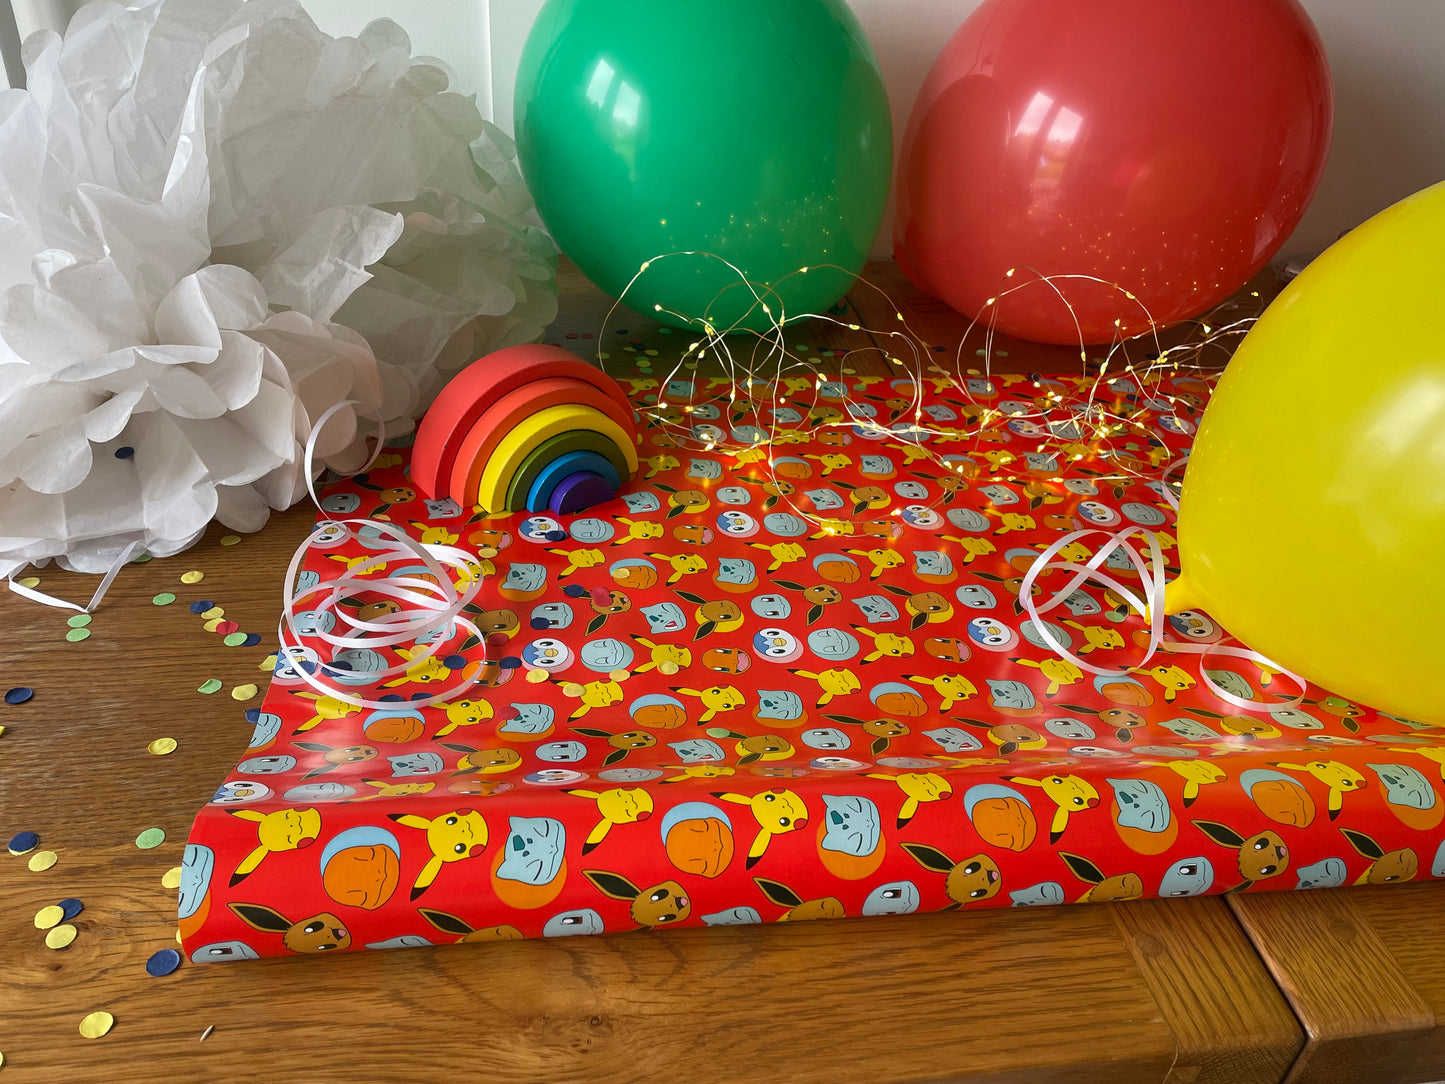 Rolls of Wrapping Paper